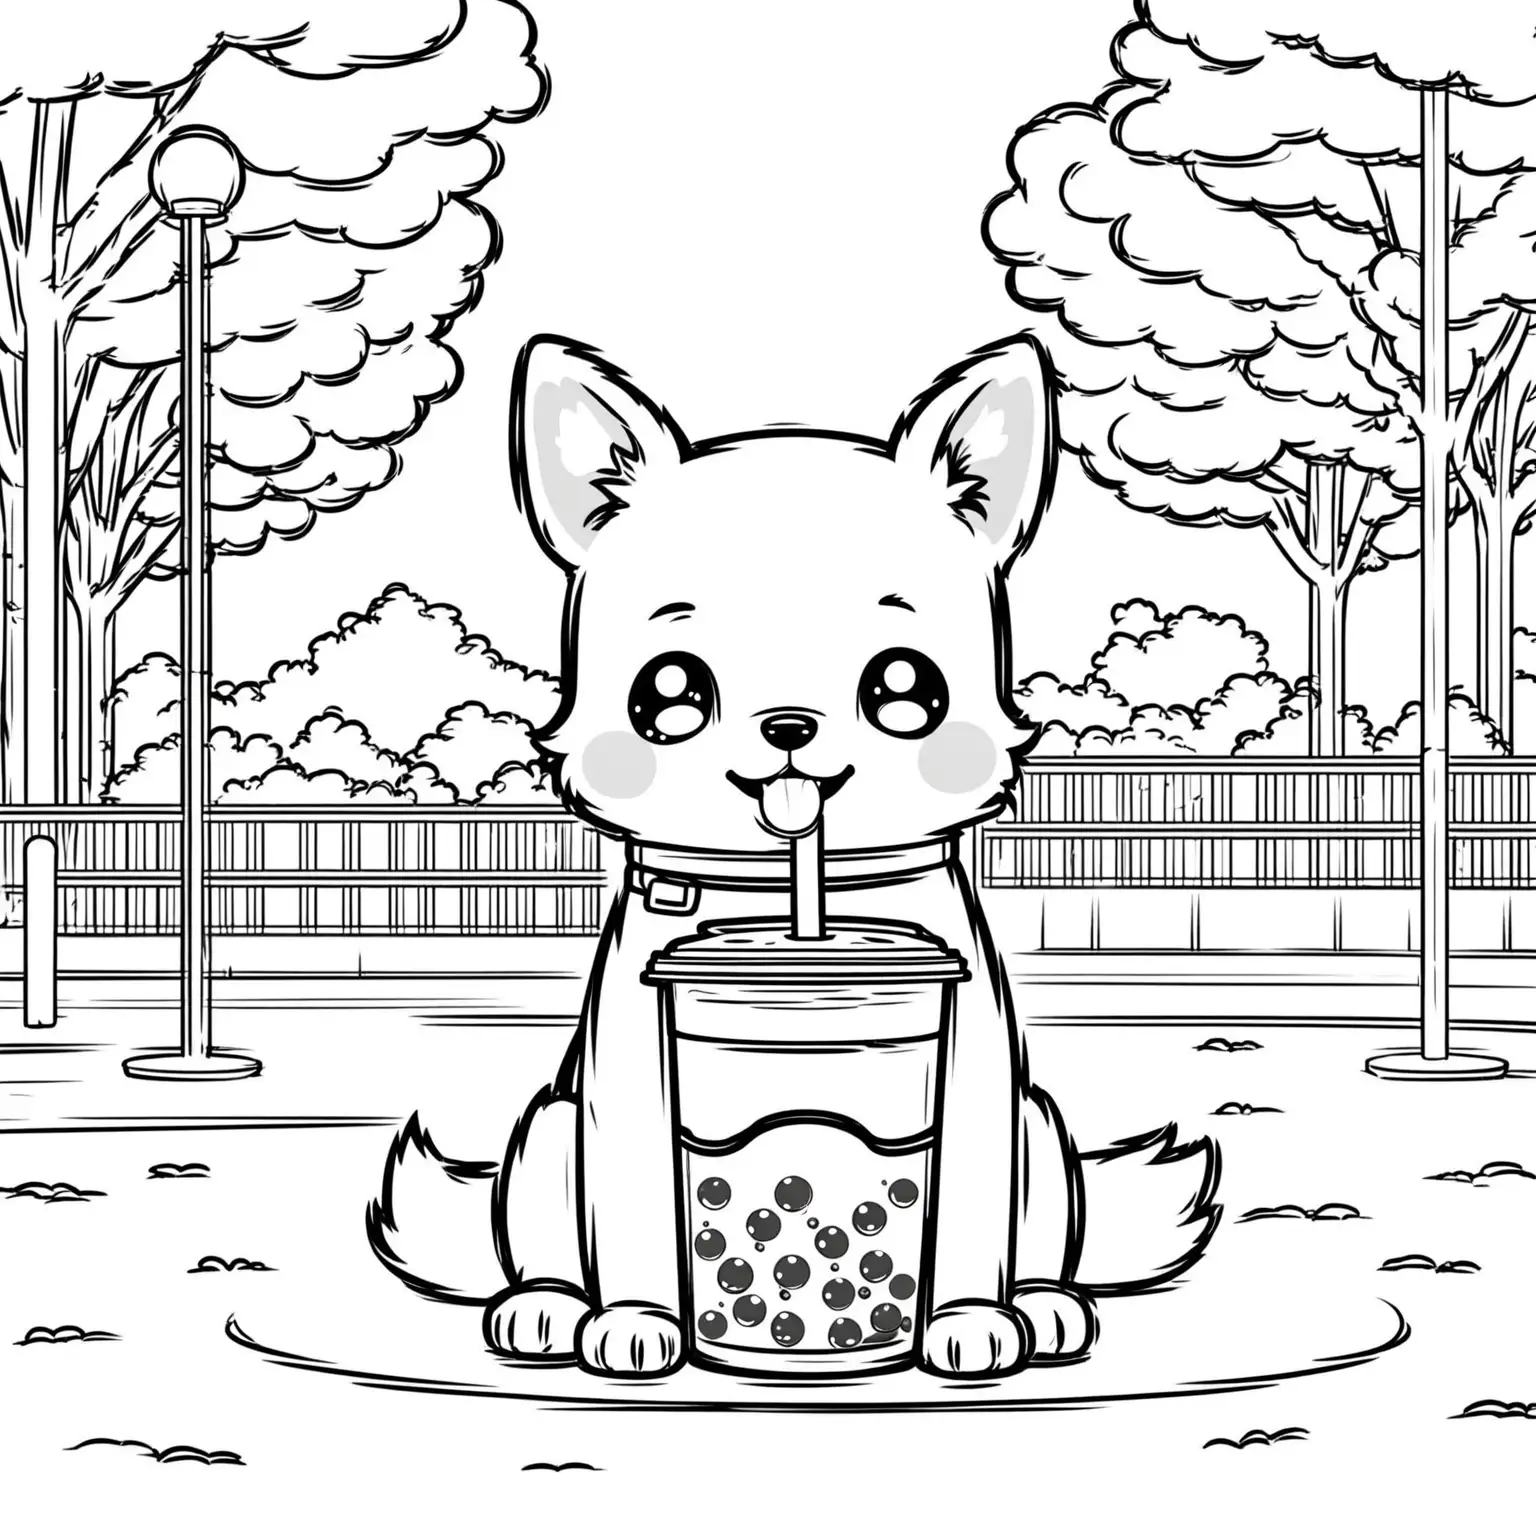 Coloring page for kids with a cute kawaii dog drinking boba tea at a park, black lines and white background only black and white